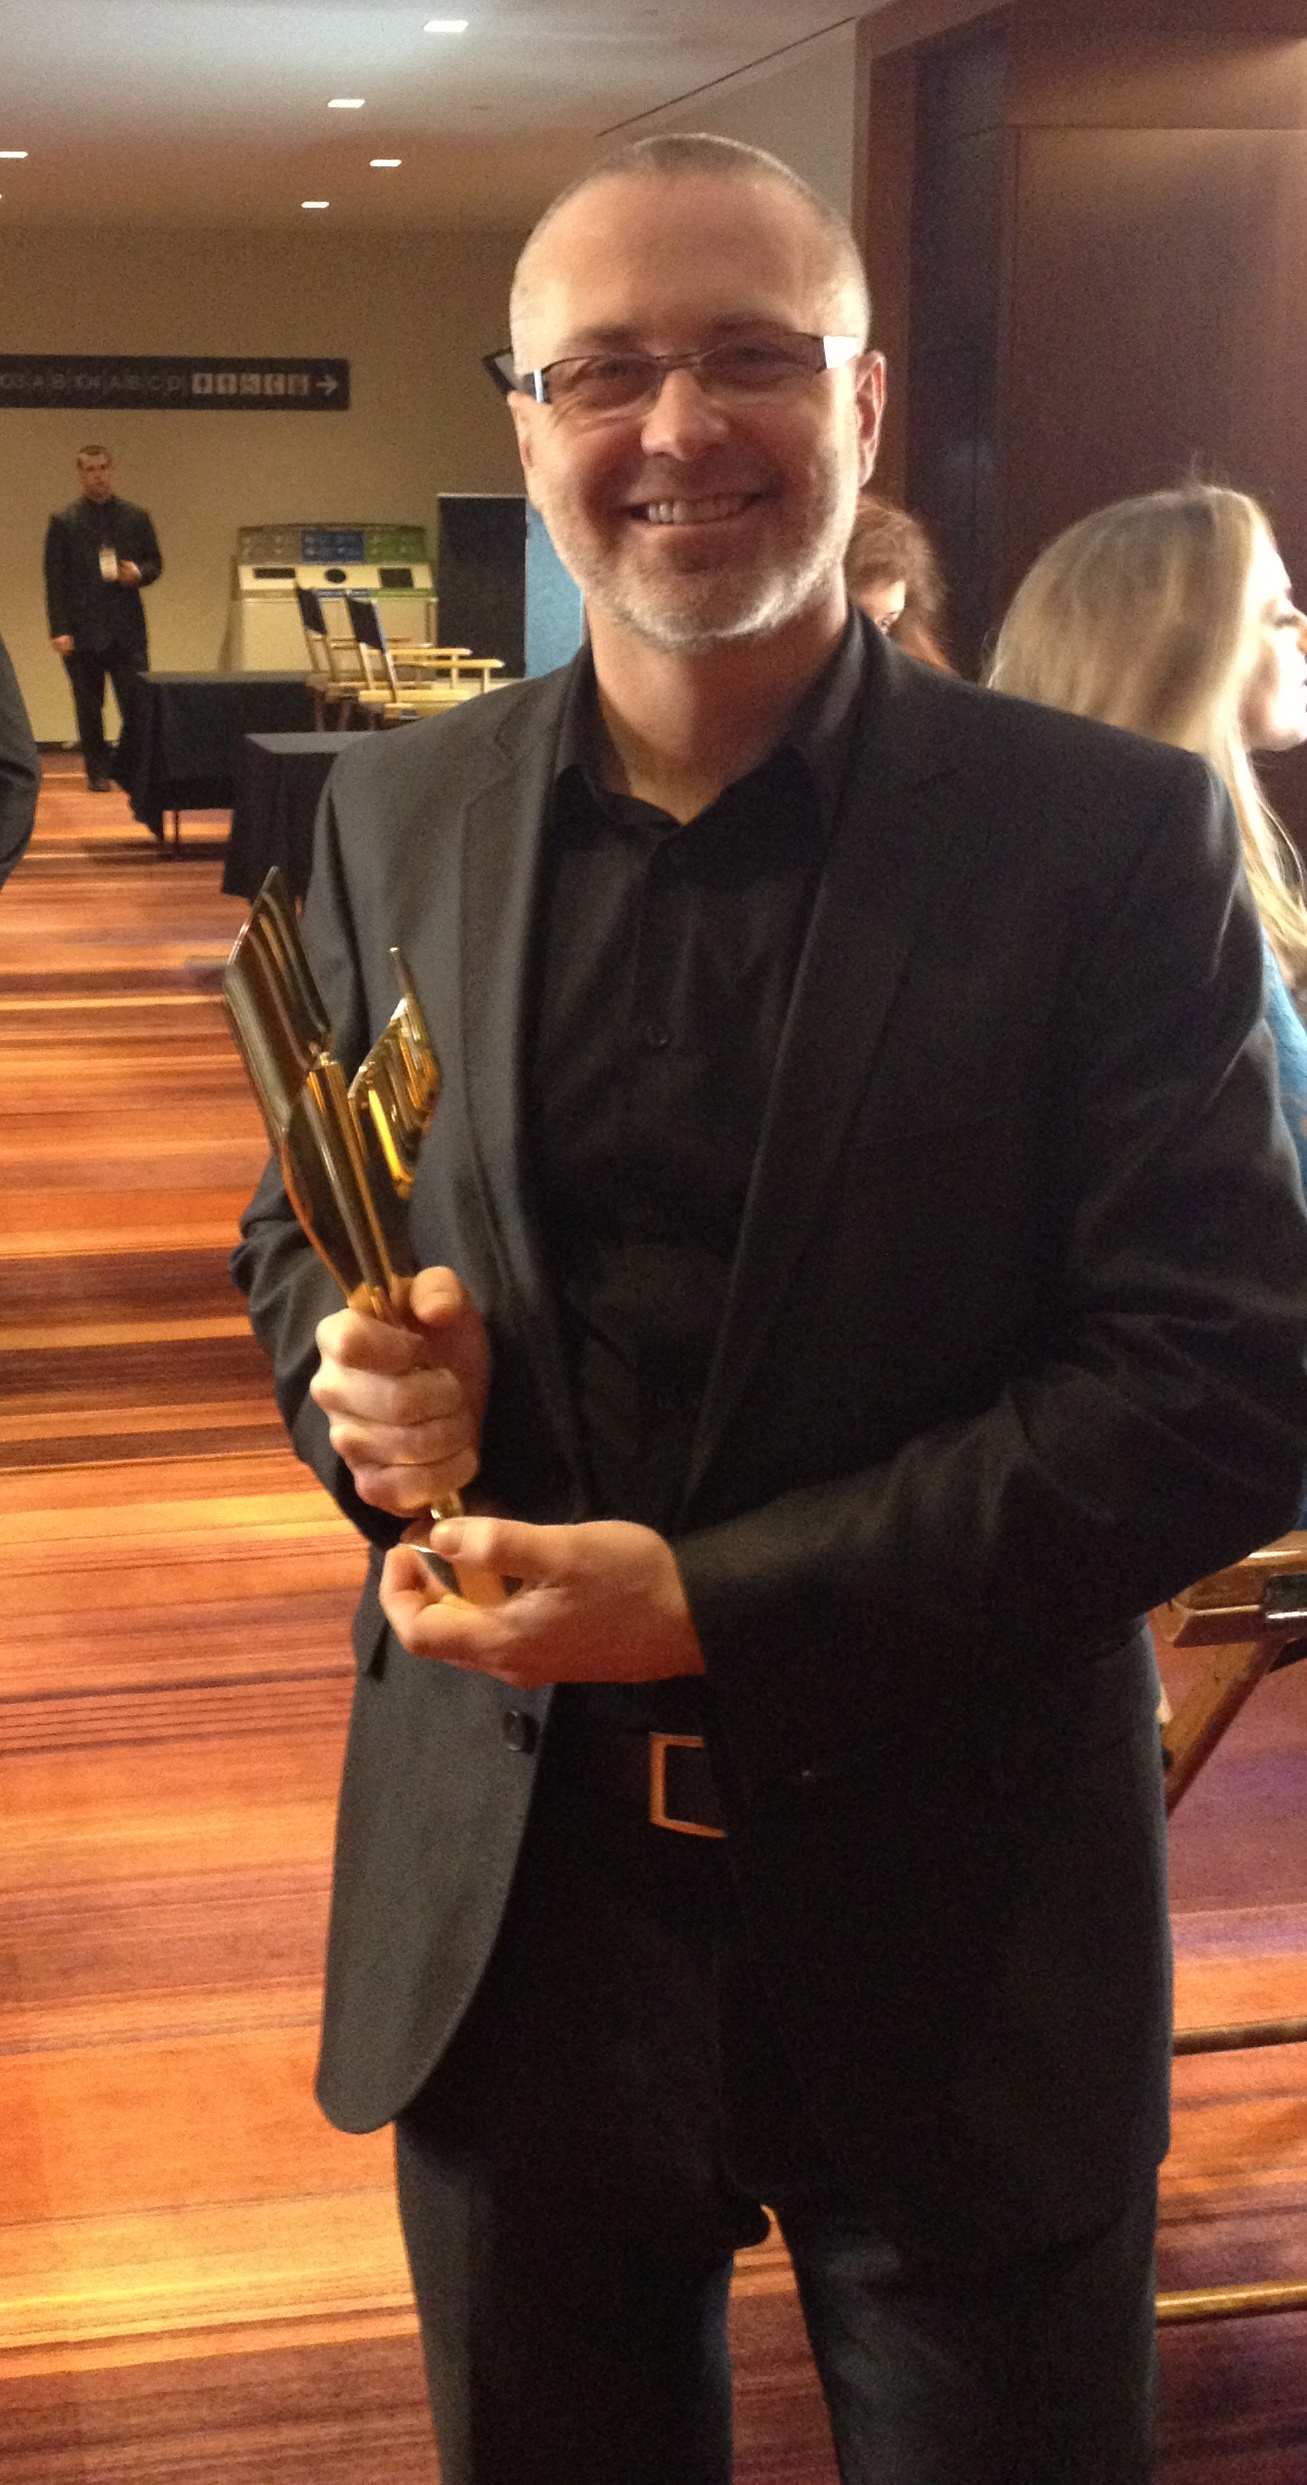 Jim Donovan wins a 2013 Canadian Screen Award for best director in a dramatic TV series for Flashpoint.